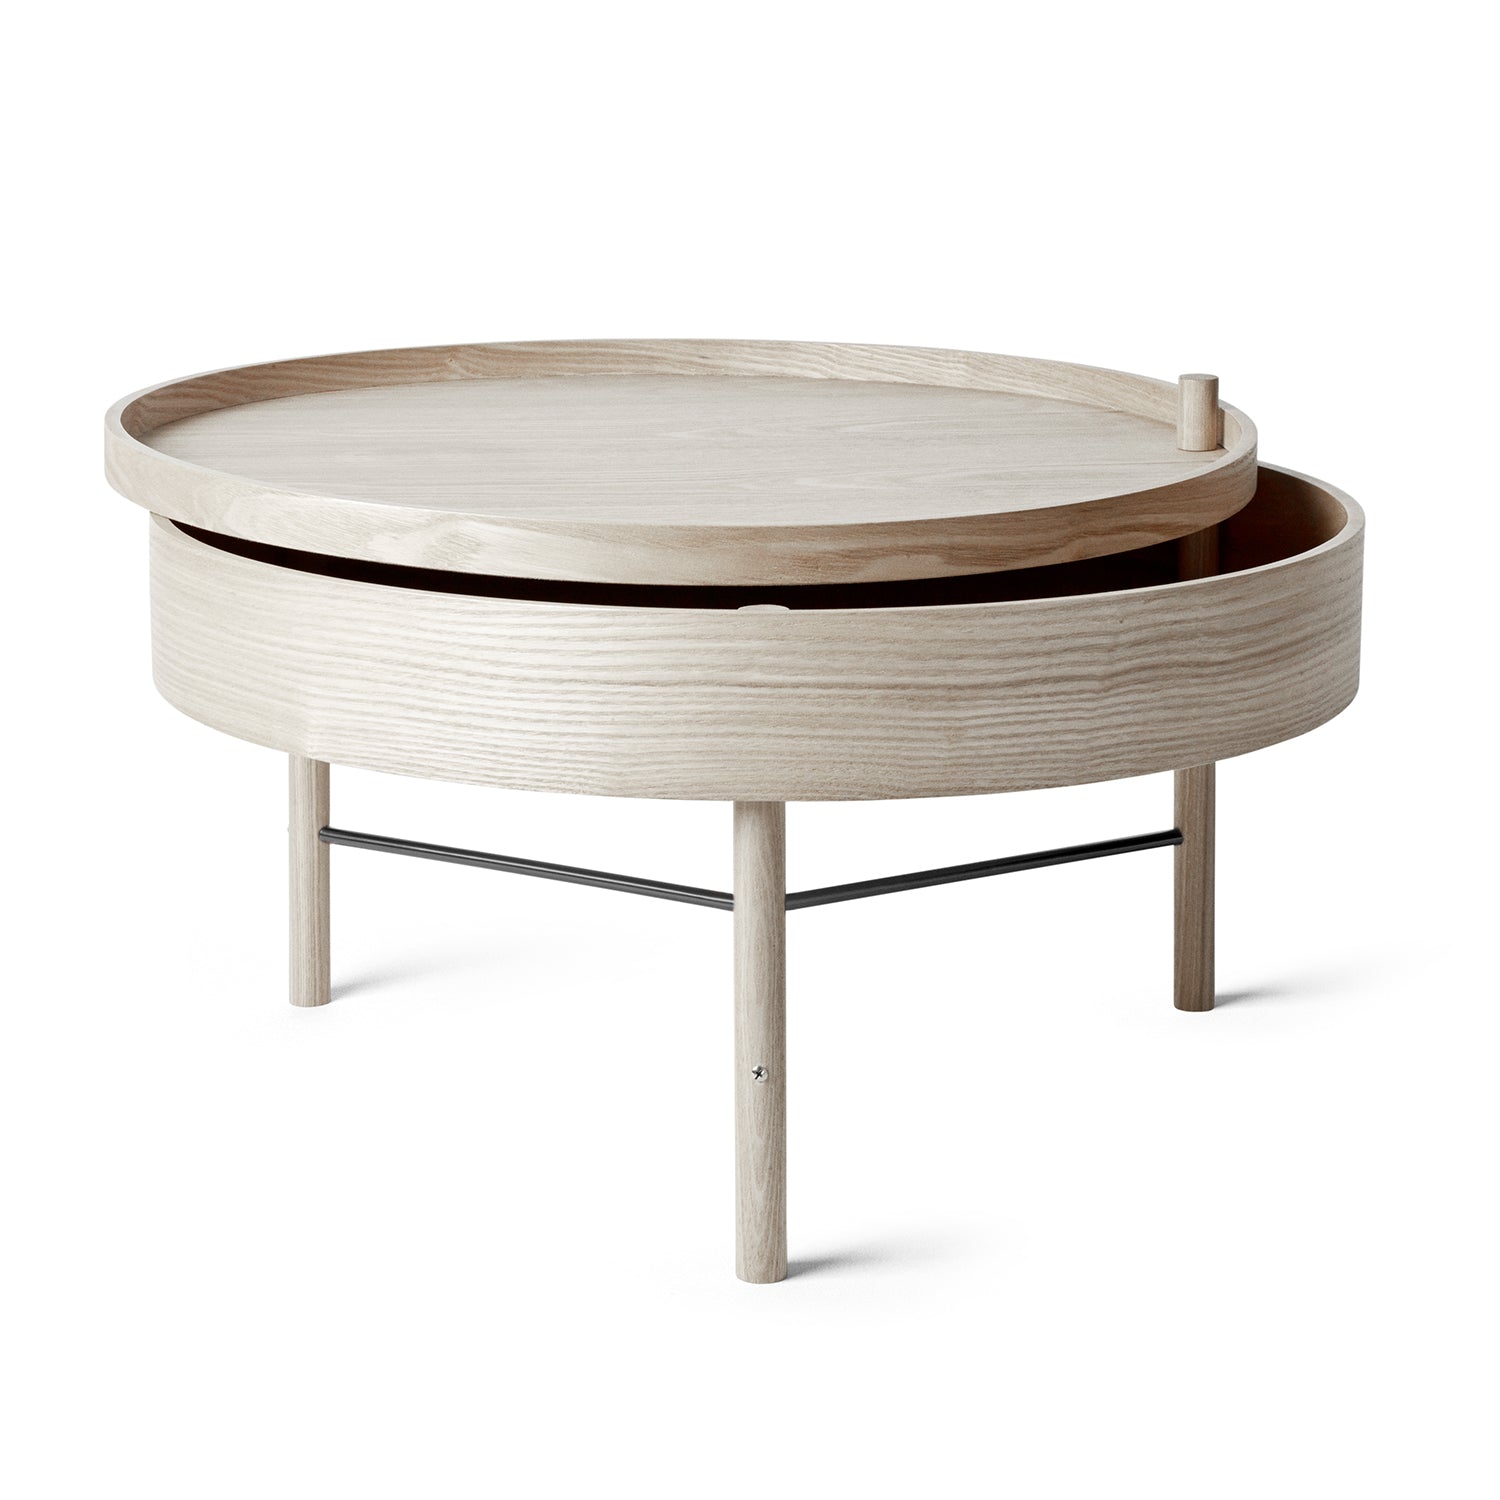 Turning Table - The Design Choice